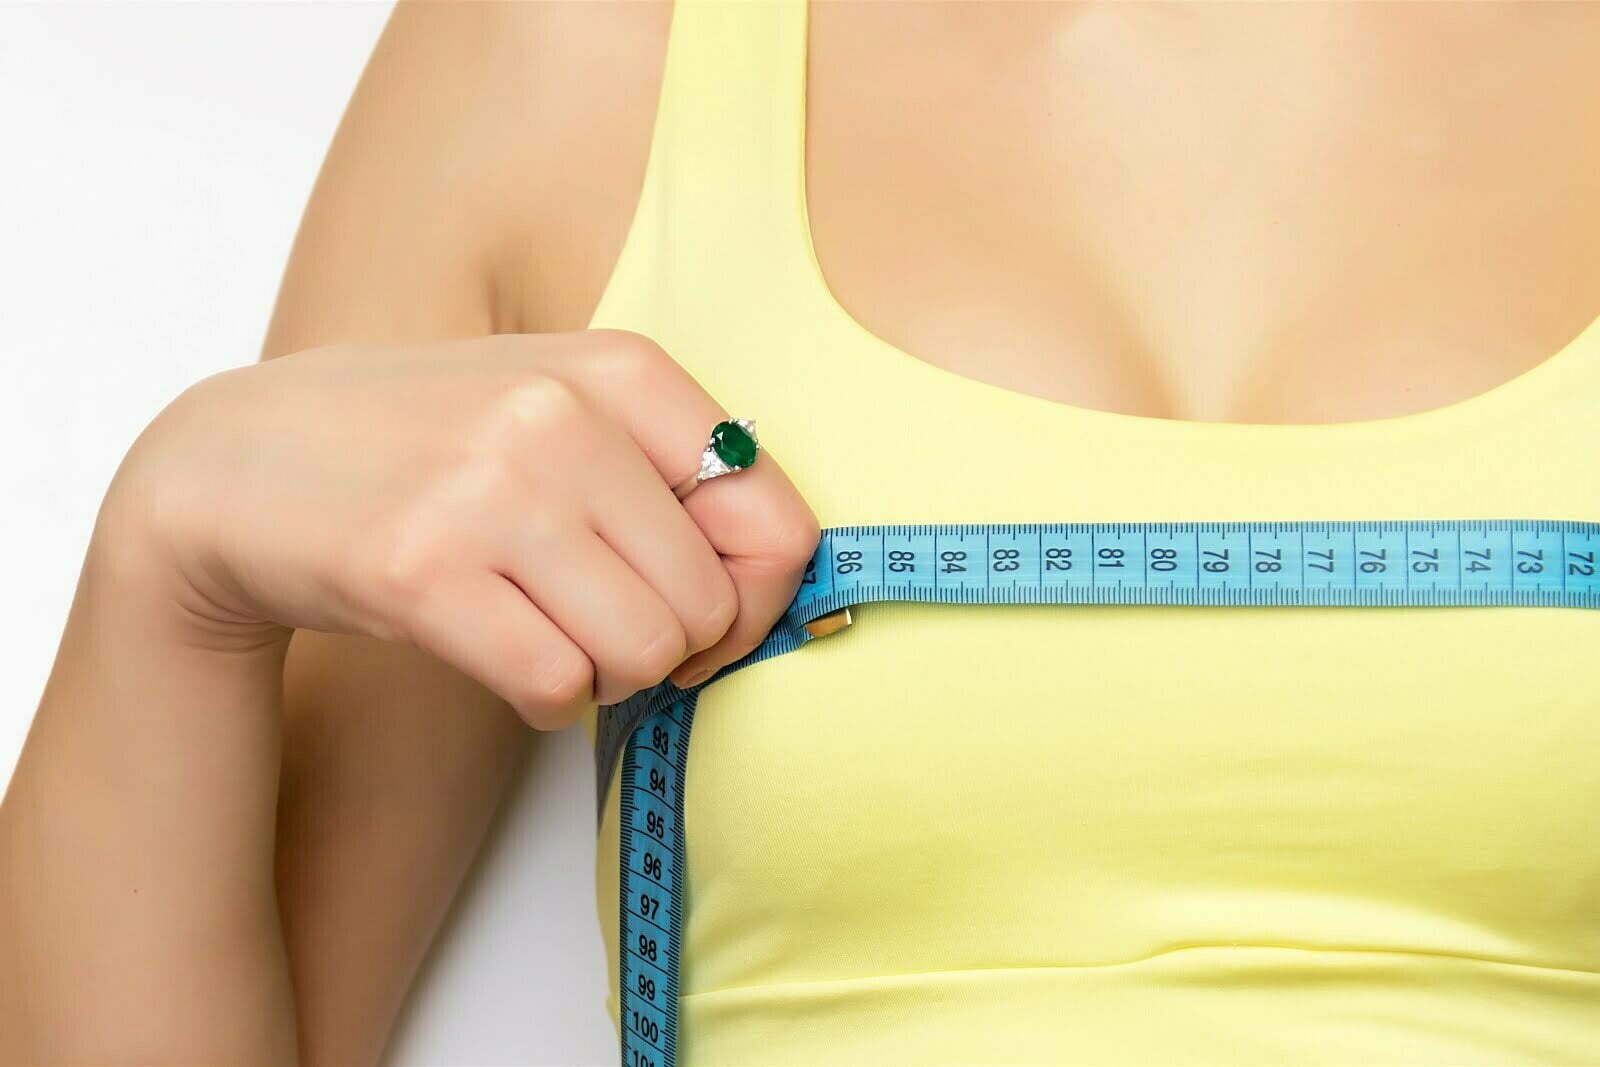 Myth No.1 - For your bra size use a tape measure